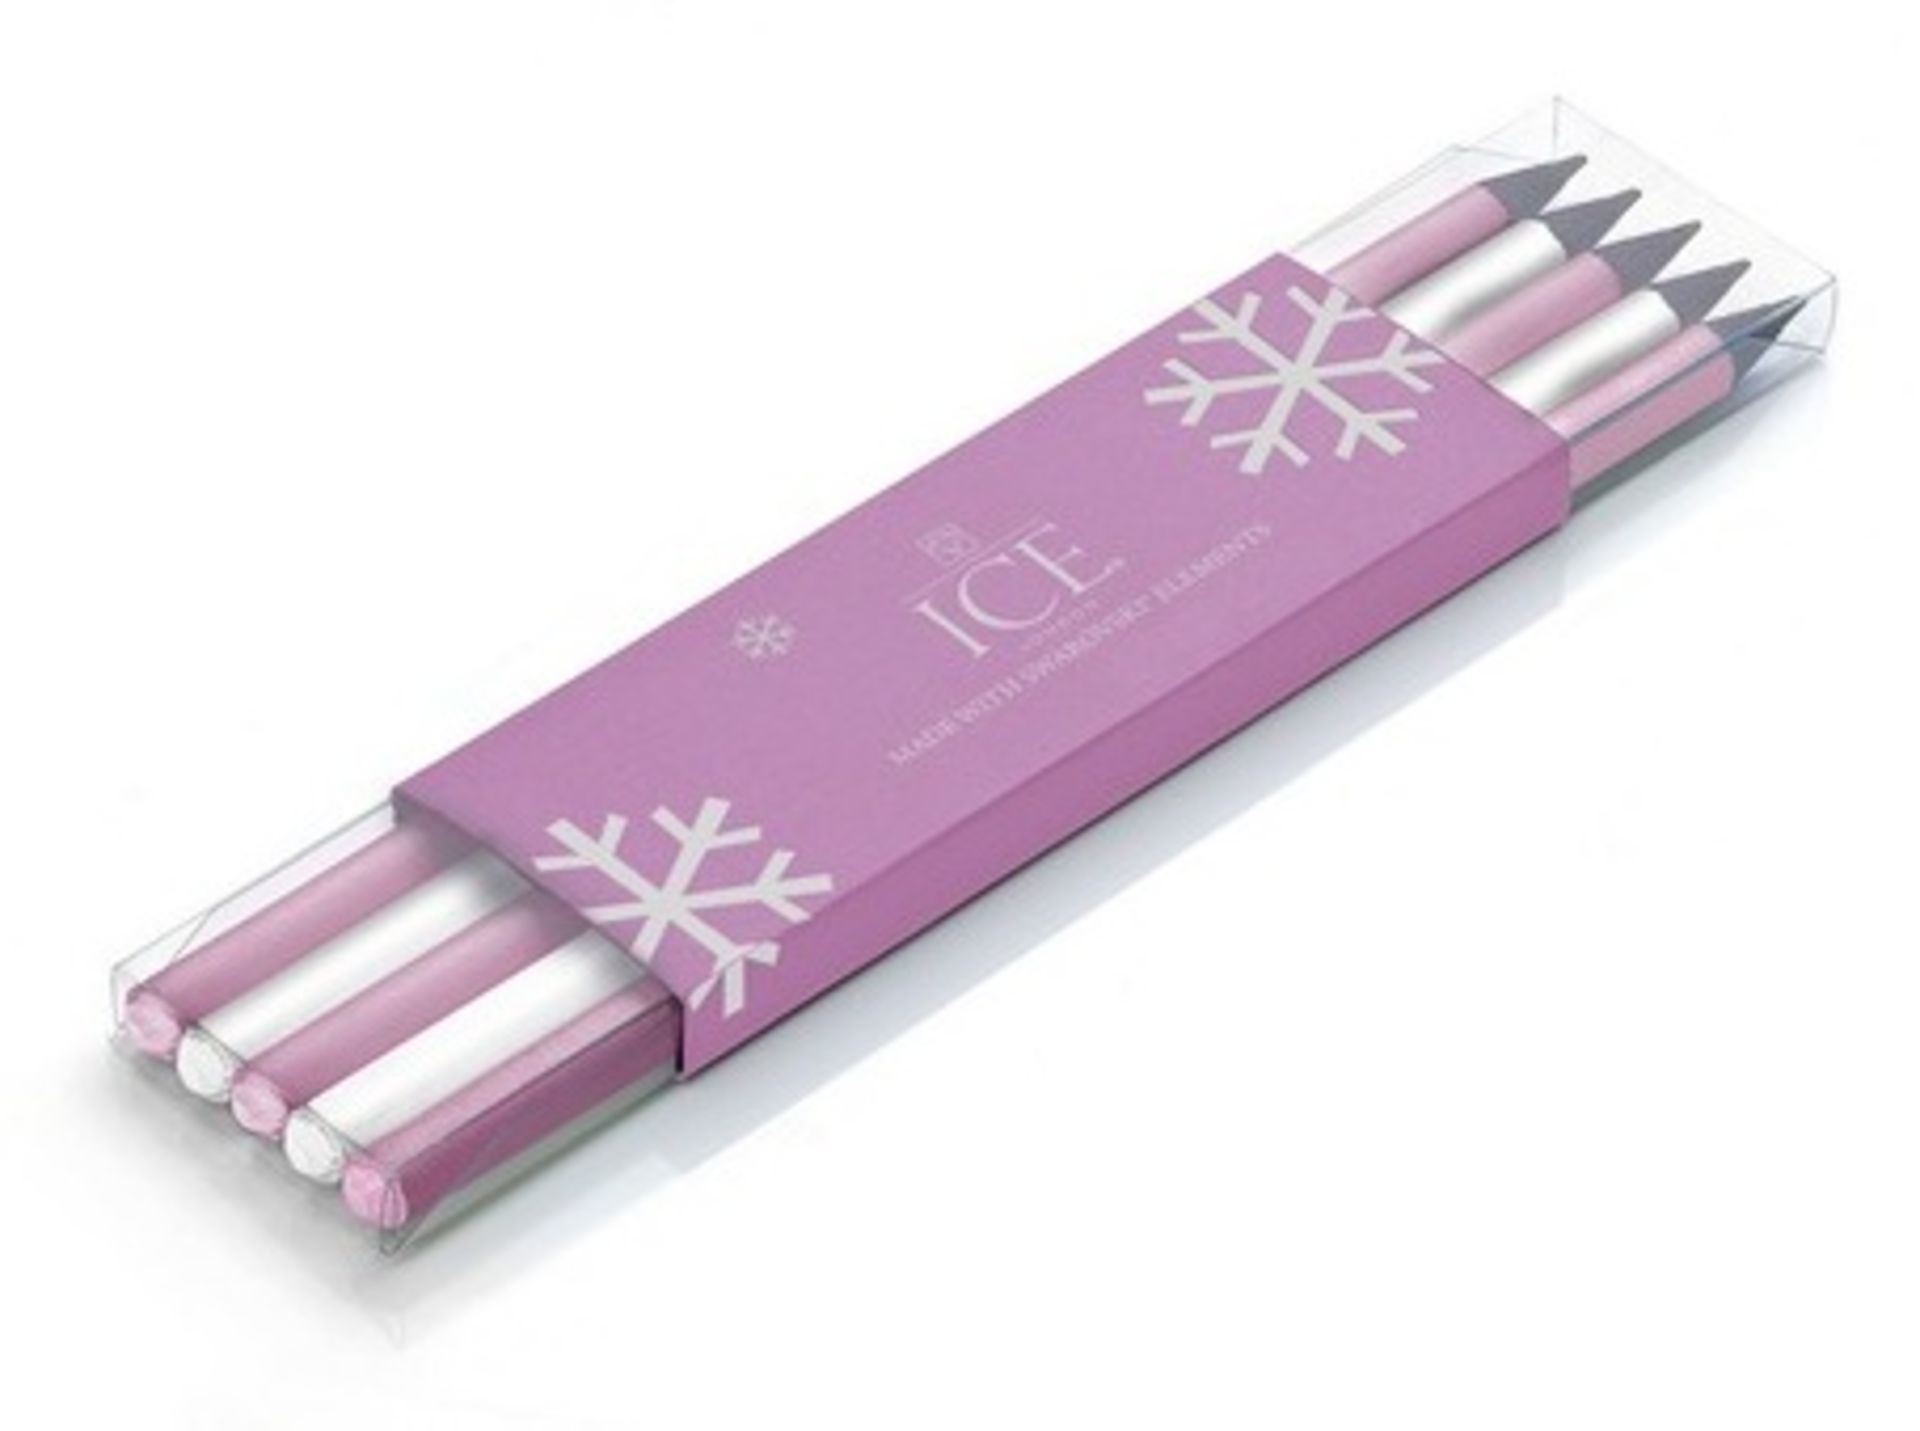 50 x ICE London Christmas Pencil Sets - Colour: PINK - Made With SWAROVSKI® ELEMENTS - Each Set - Image 2 of 4